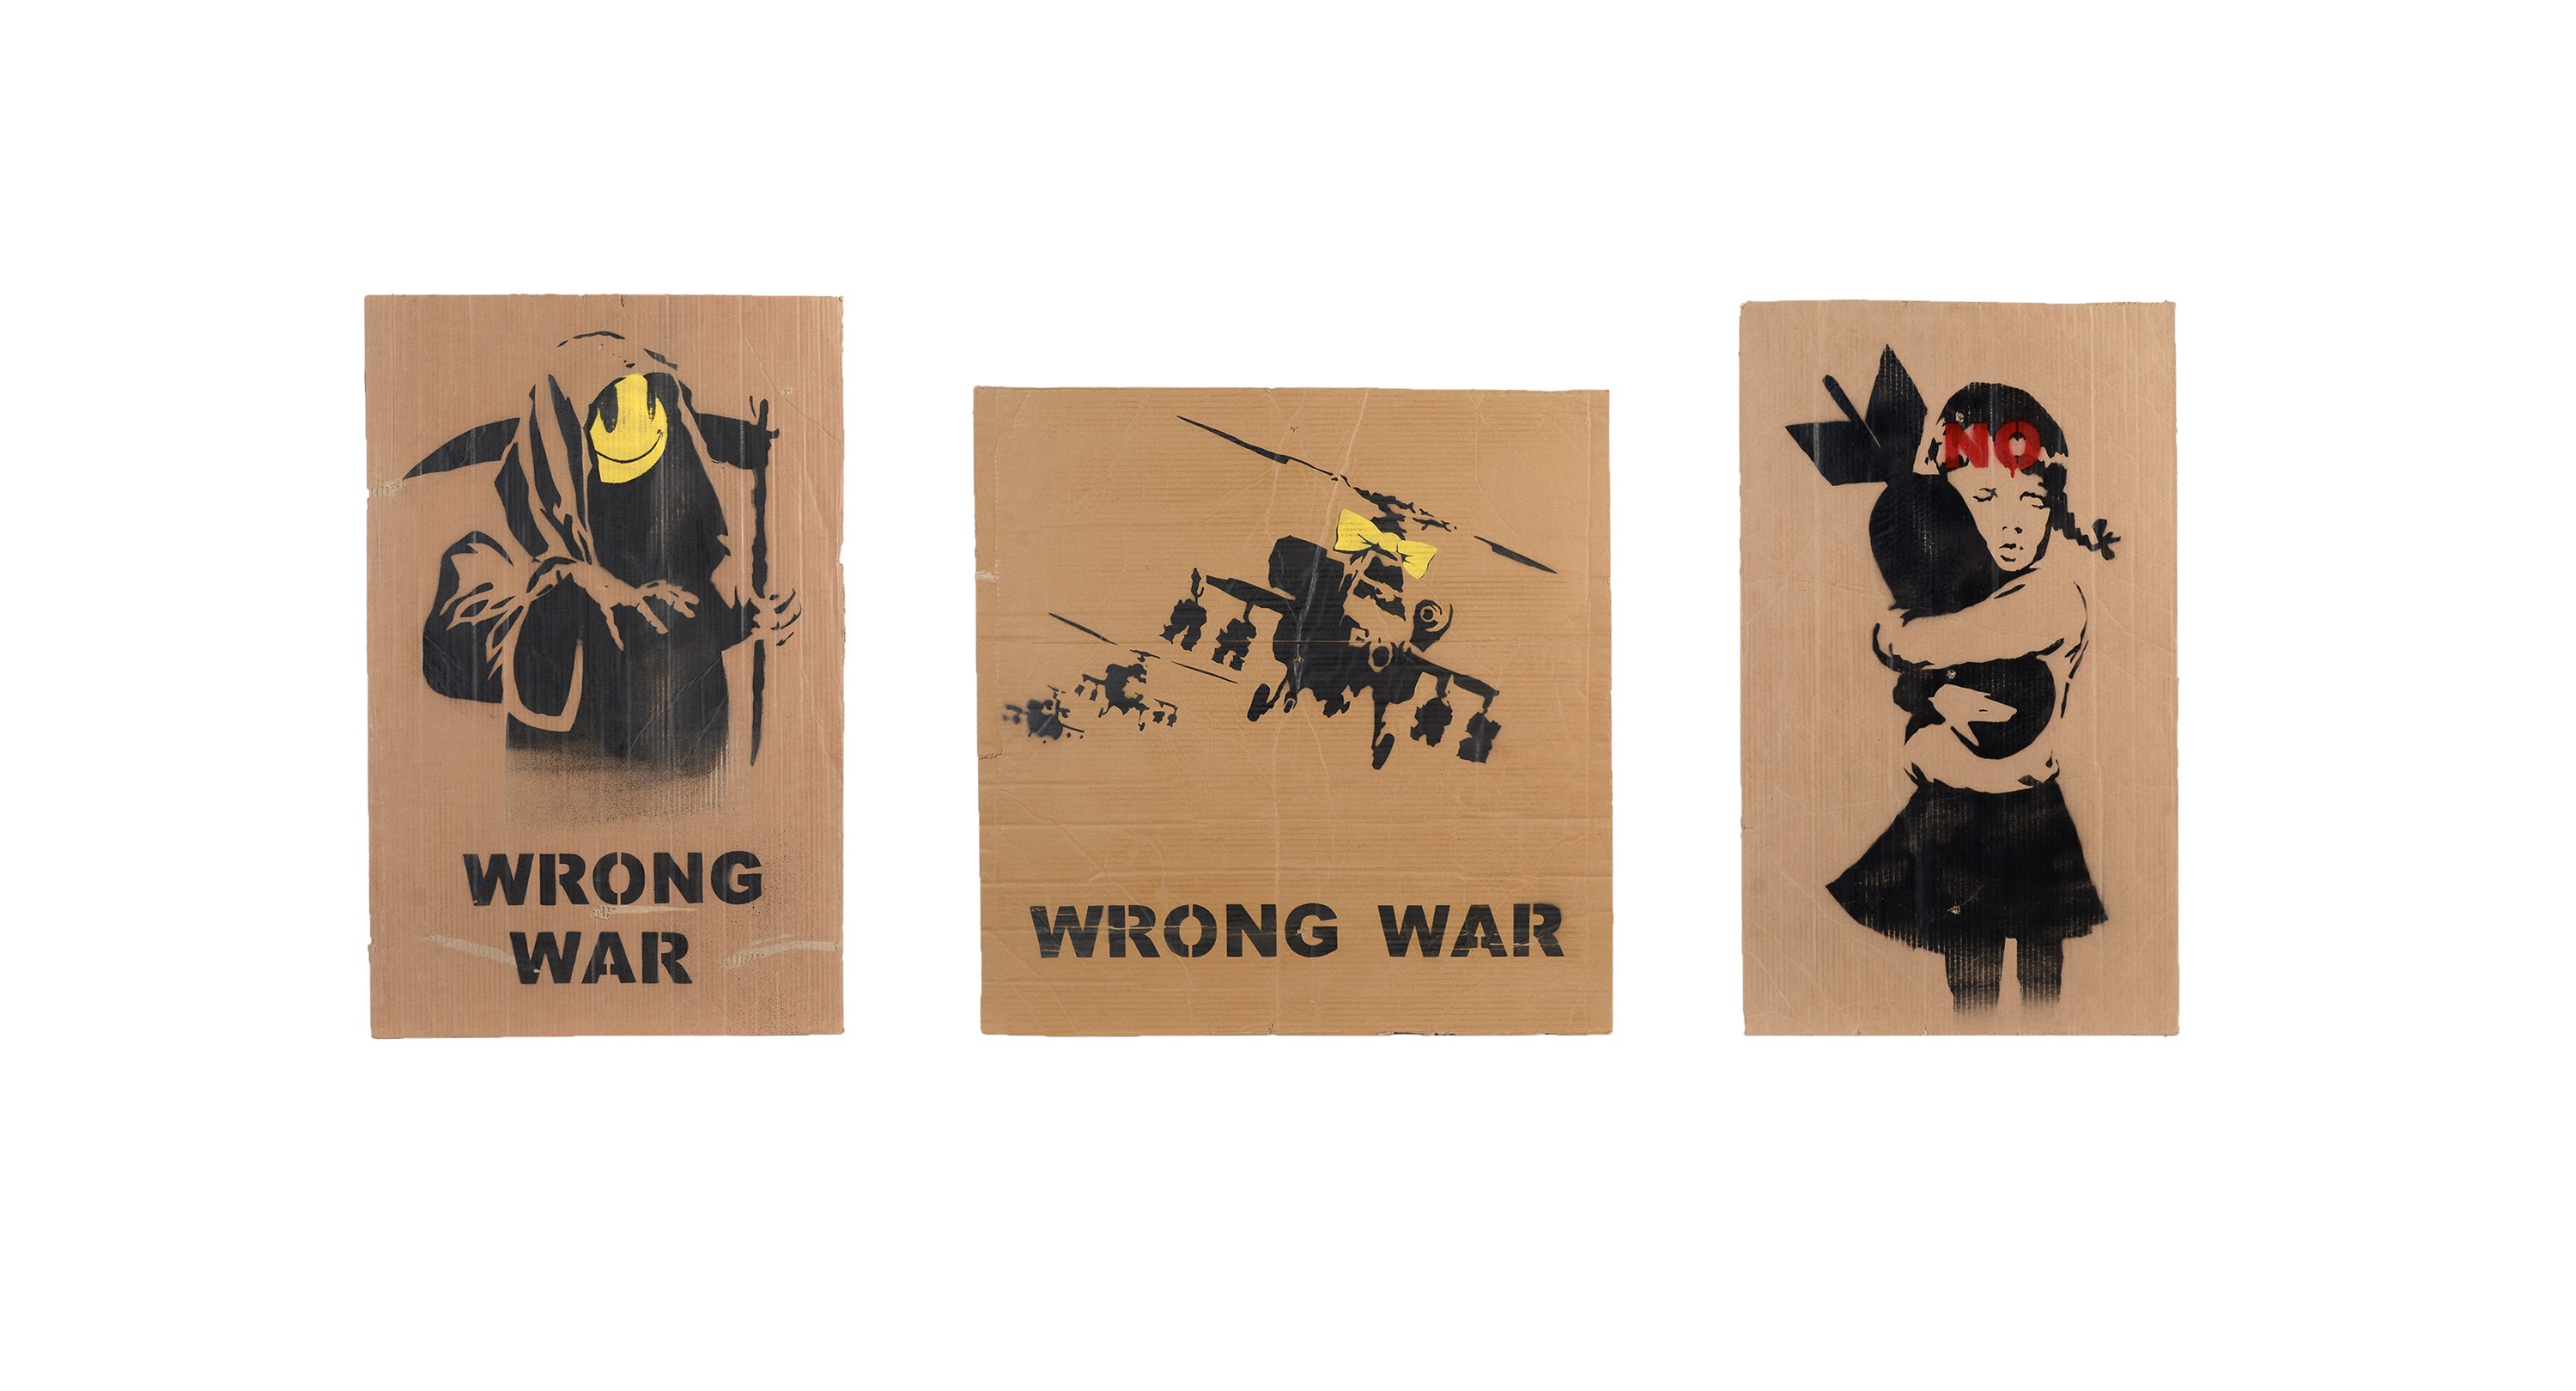 Not one, not two, but three original works of art by Banksy up for Auction!